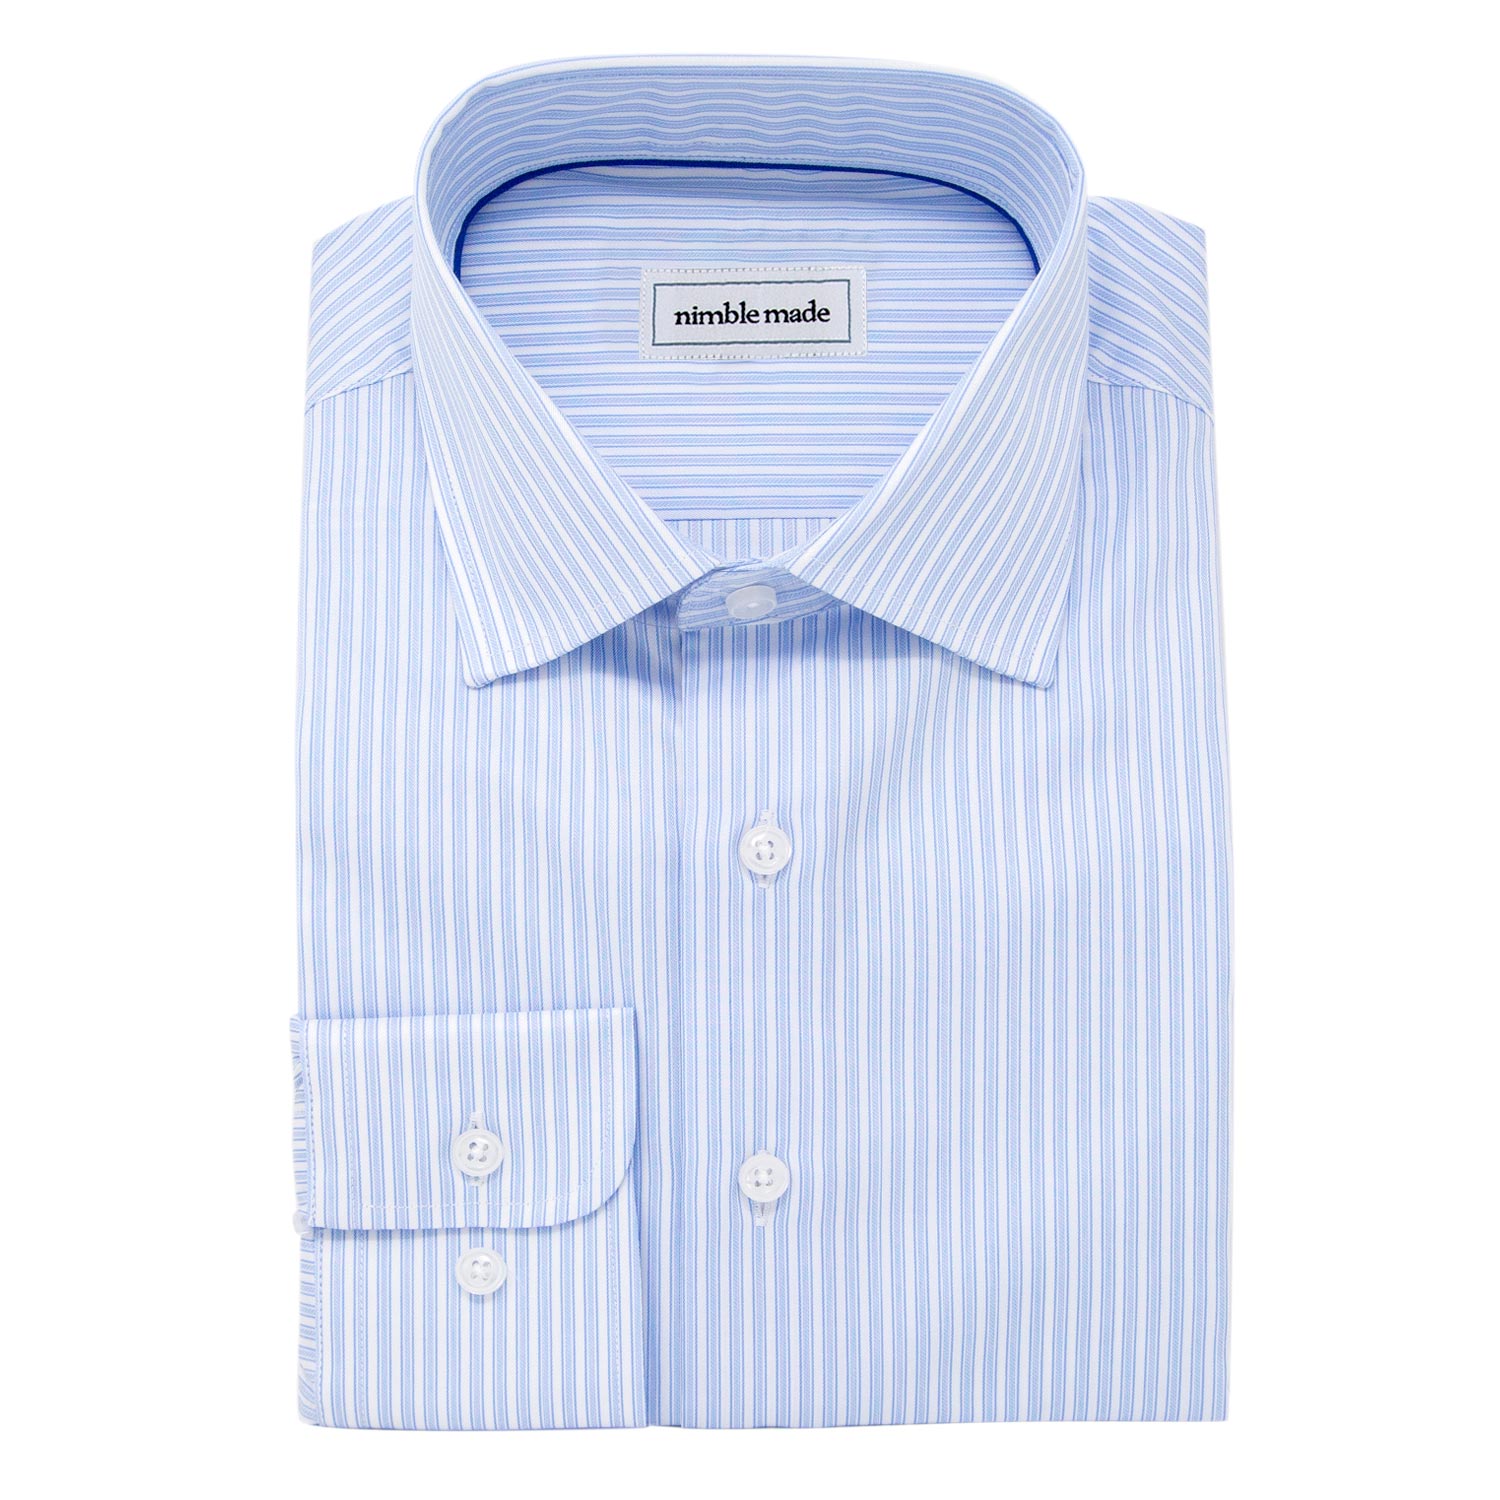 blue and white striped dress shirt folded on white background